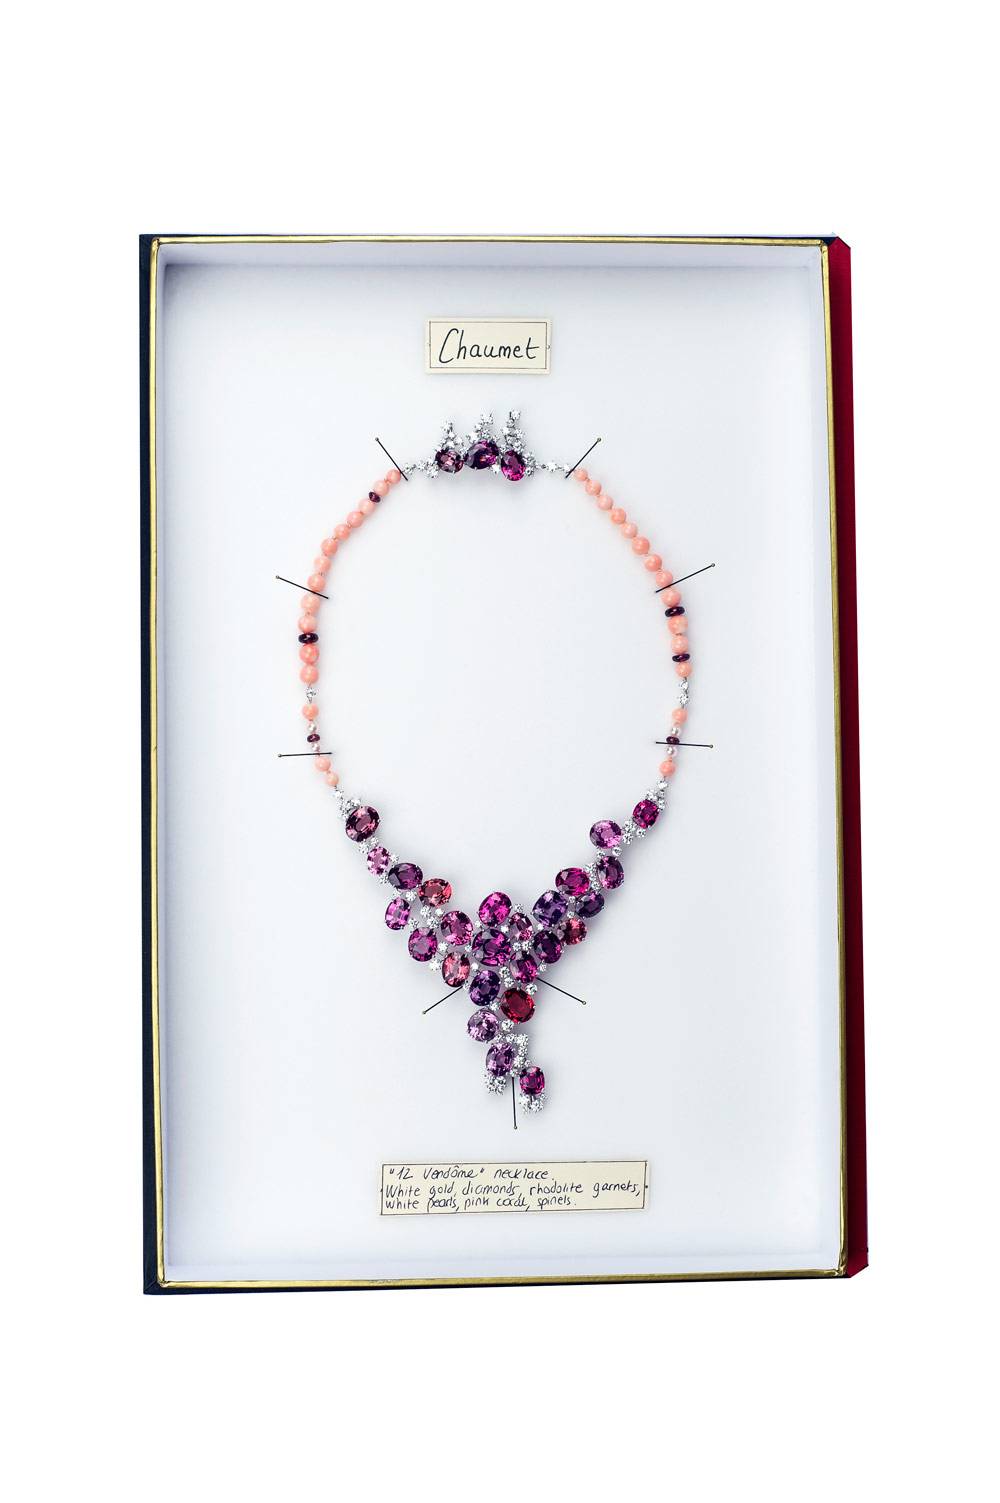 Biennale Des Antiquaires: Summer Hues And Colored Stones